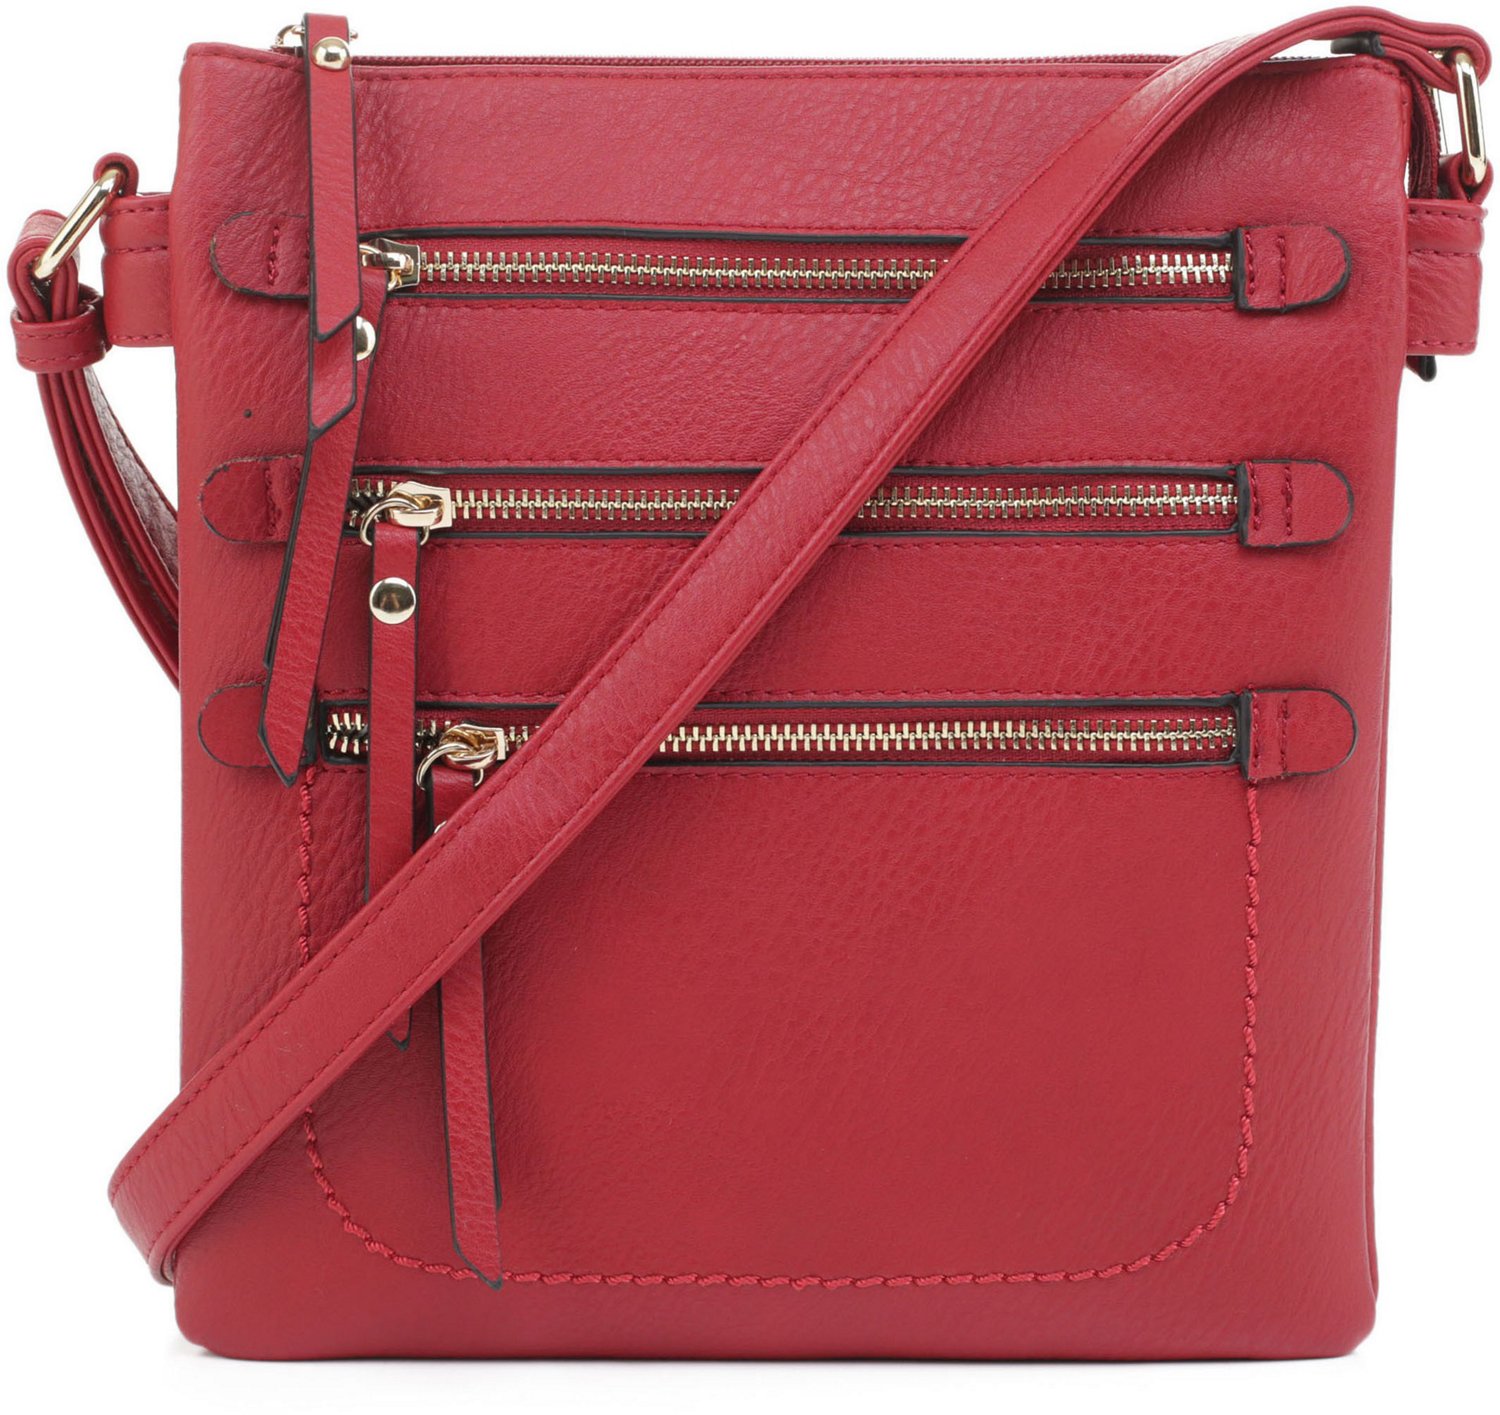 Jessie & James Piper Concealed Carry Lock and Key Crossbody Bag | Academy